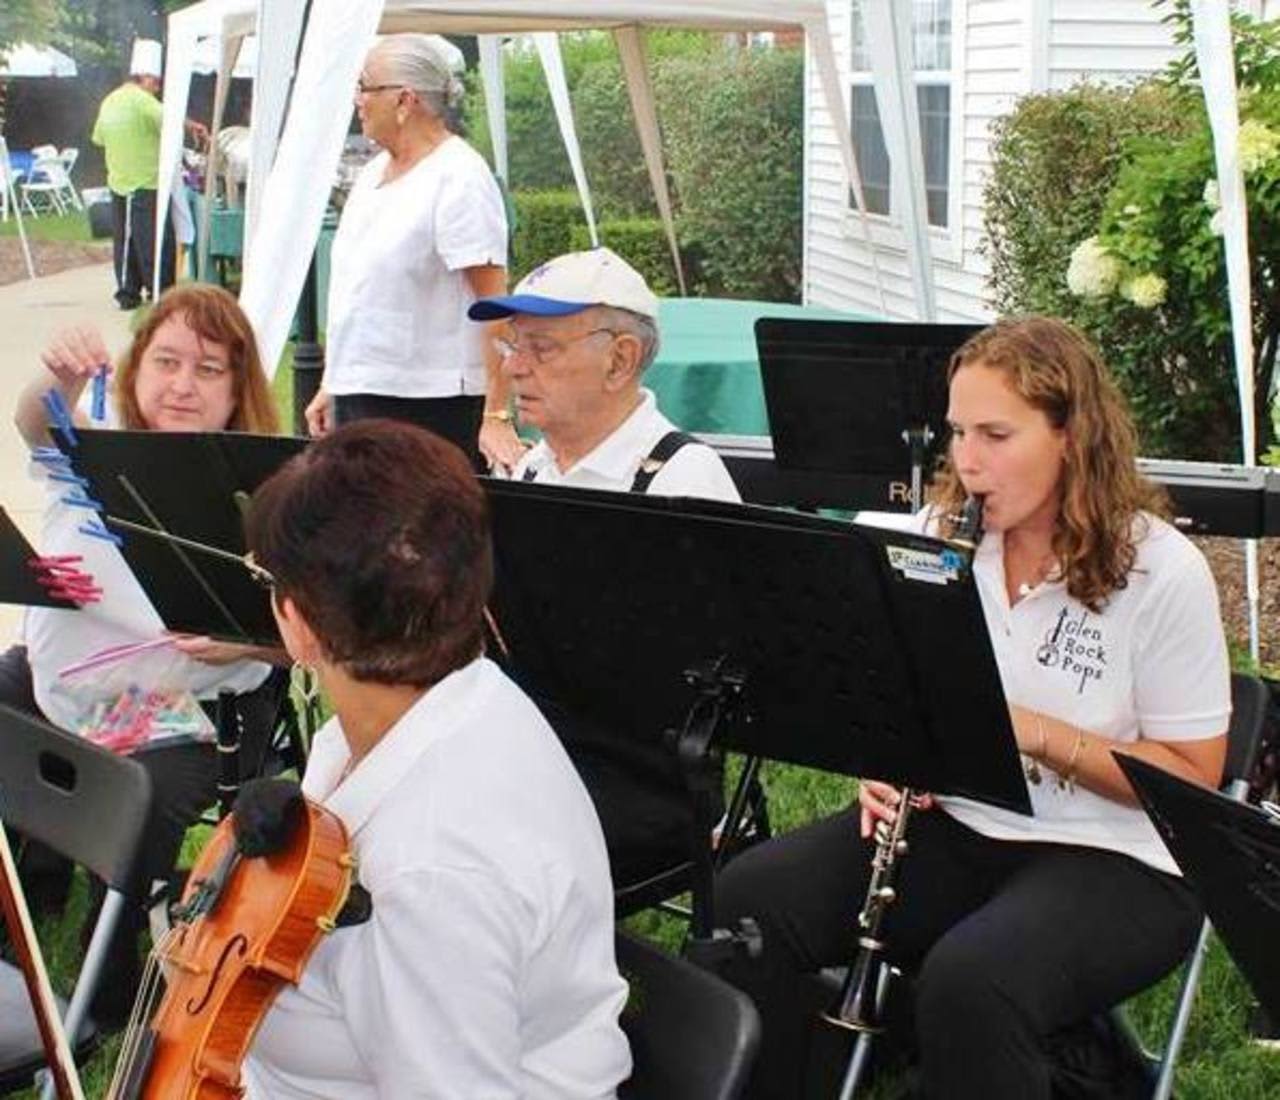 The Glen Rock Pops will perform a free holiday concert December 6.